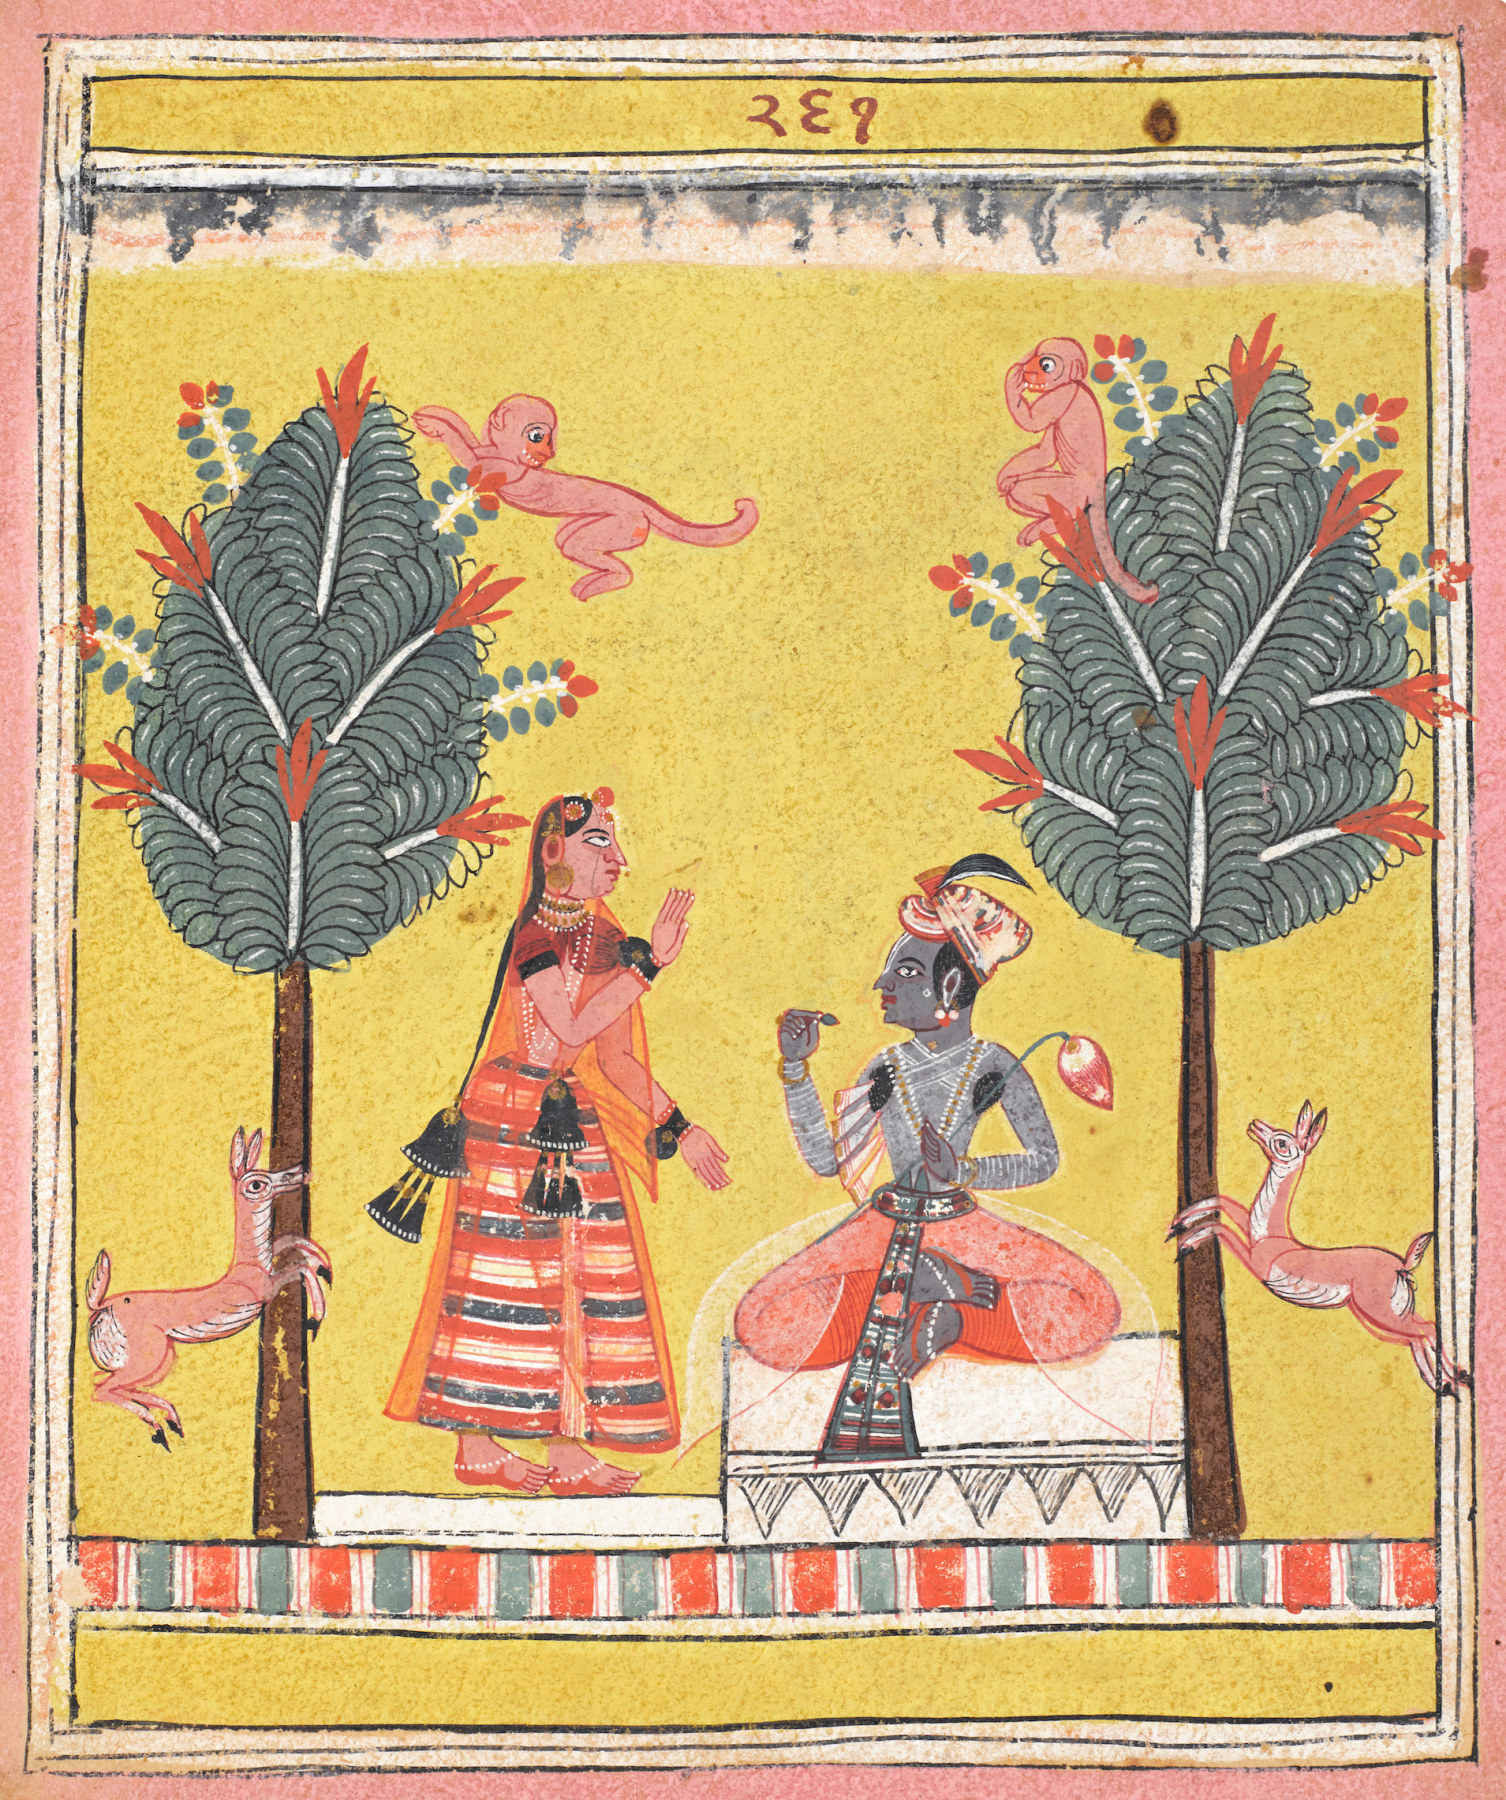 the sakhi is addressing Krishna, who is seated chewing pan in the woods between trees in which monkeys are gamboling and deer frolic